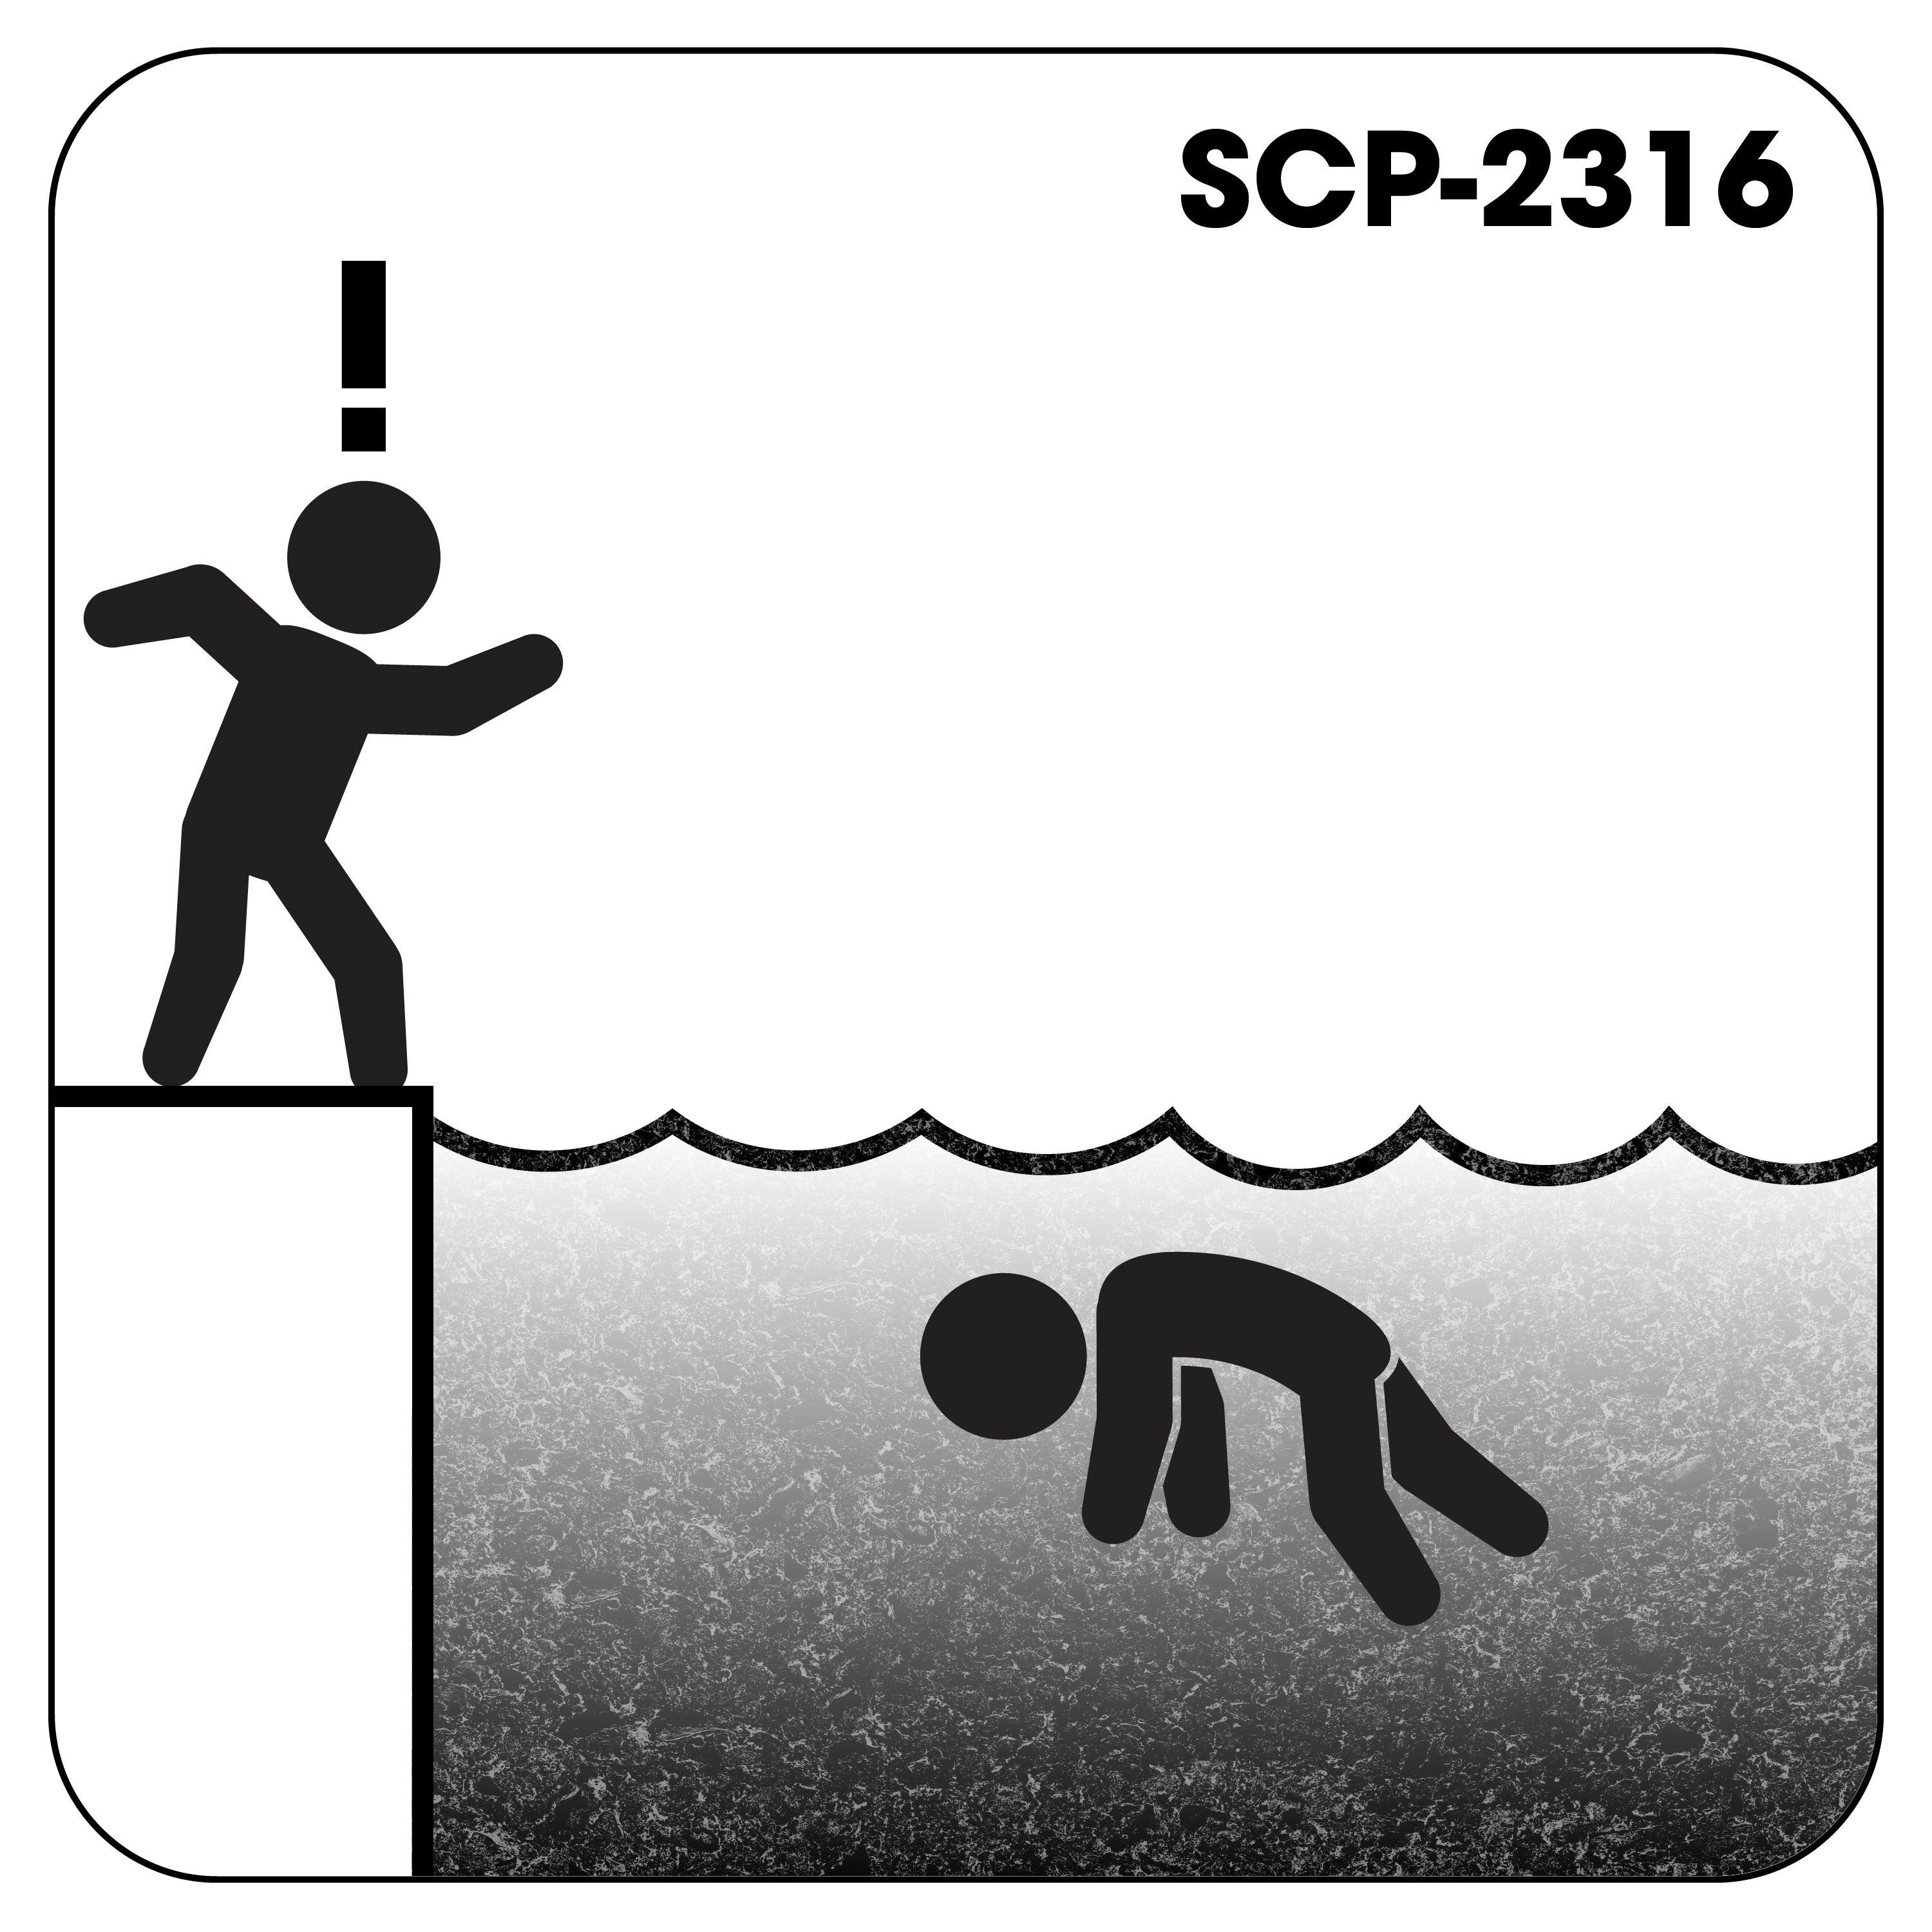 SCP-2316: 